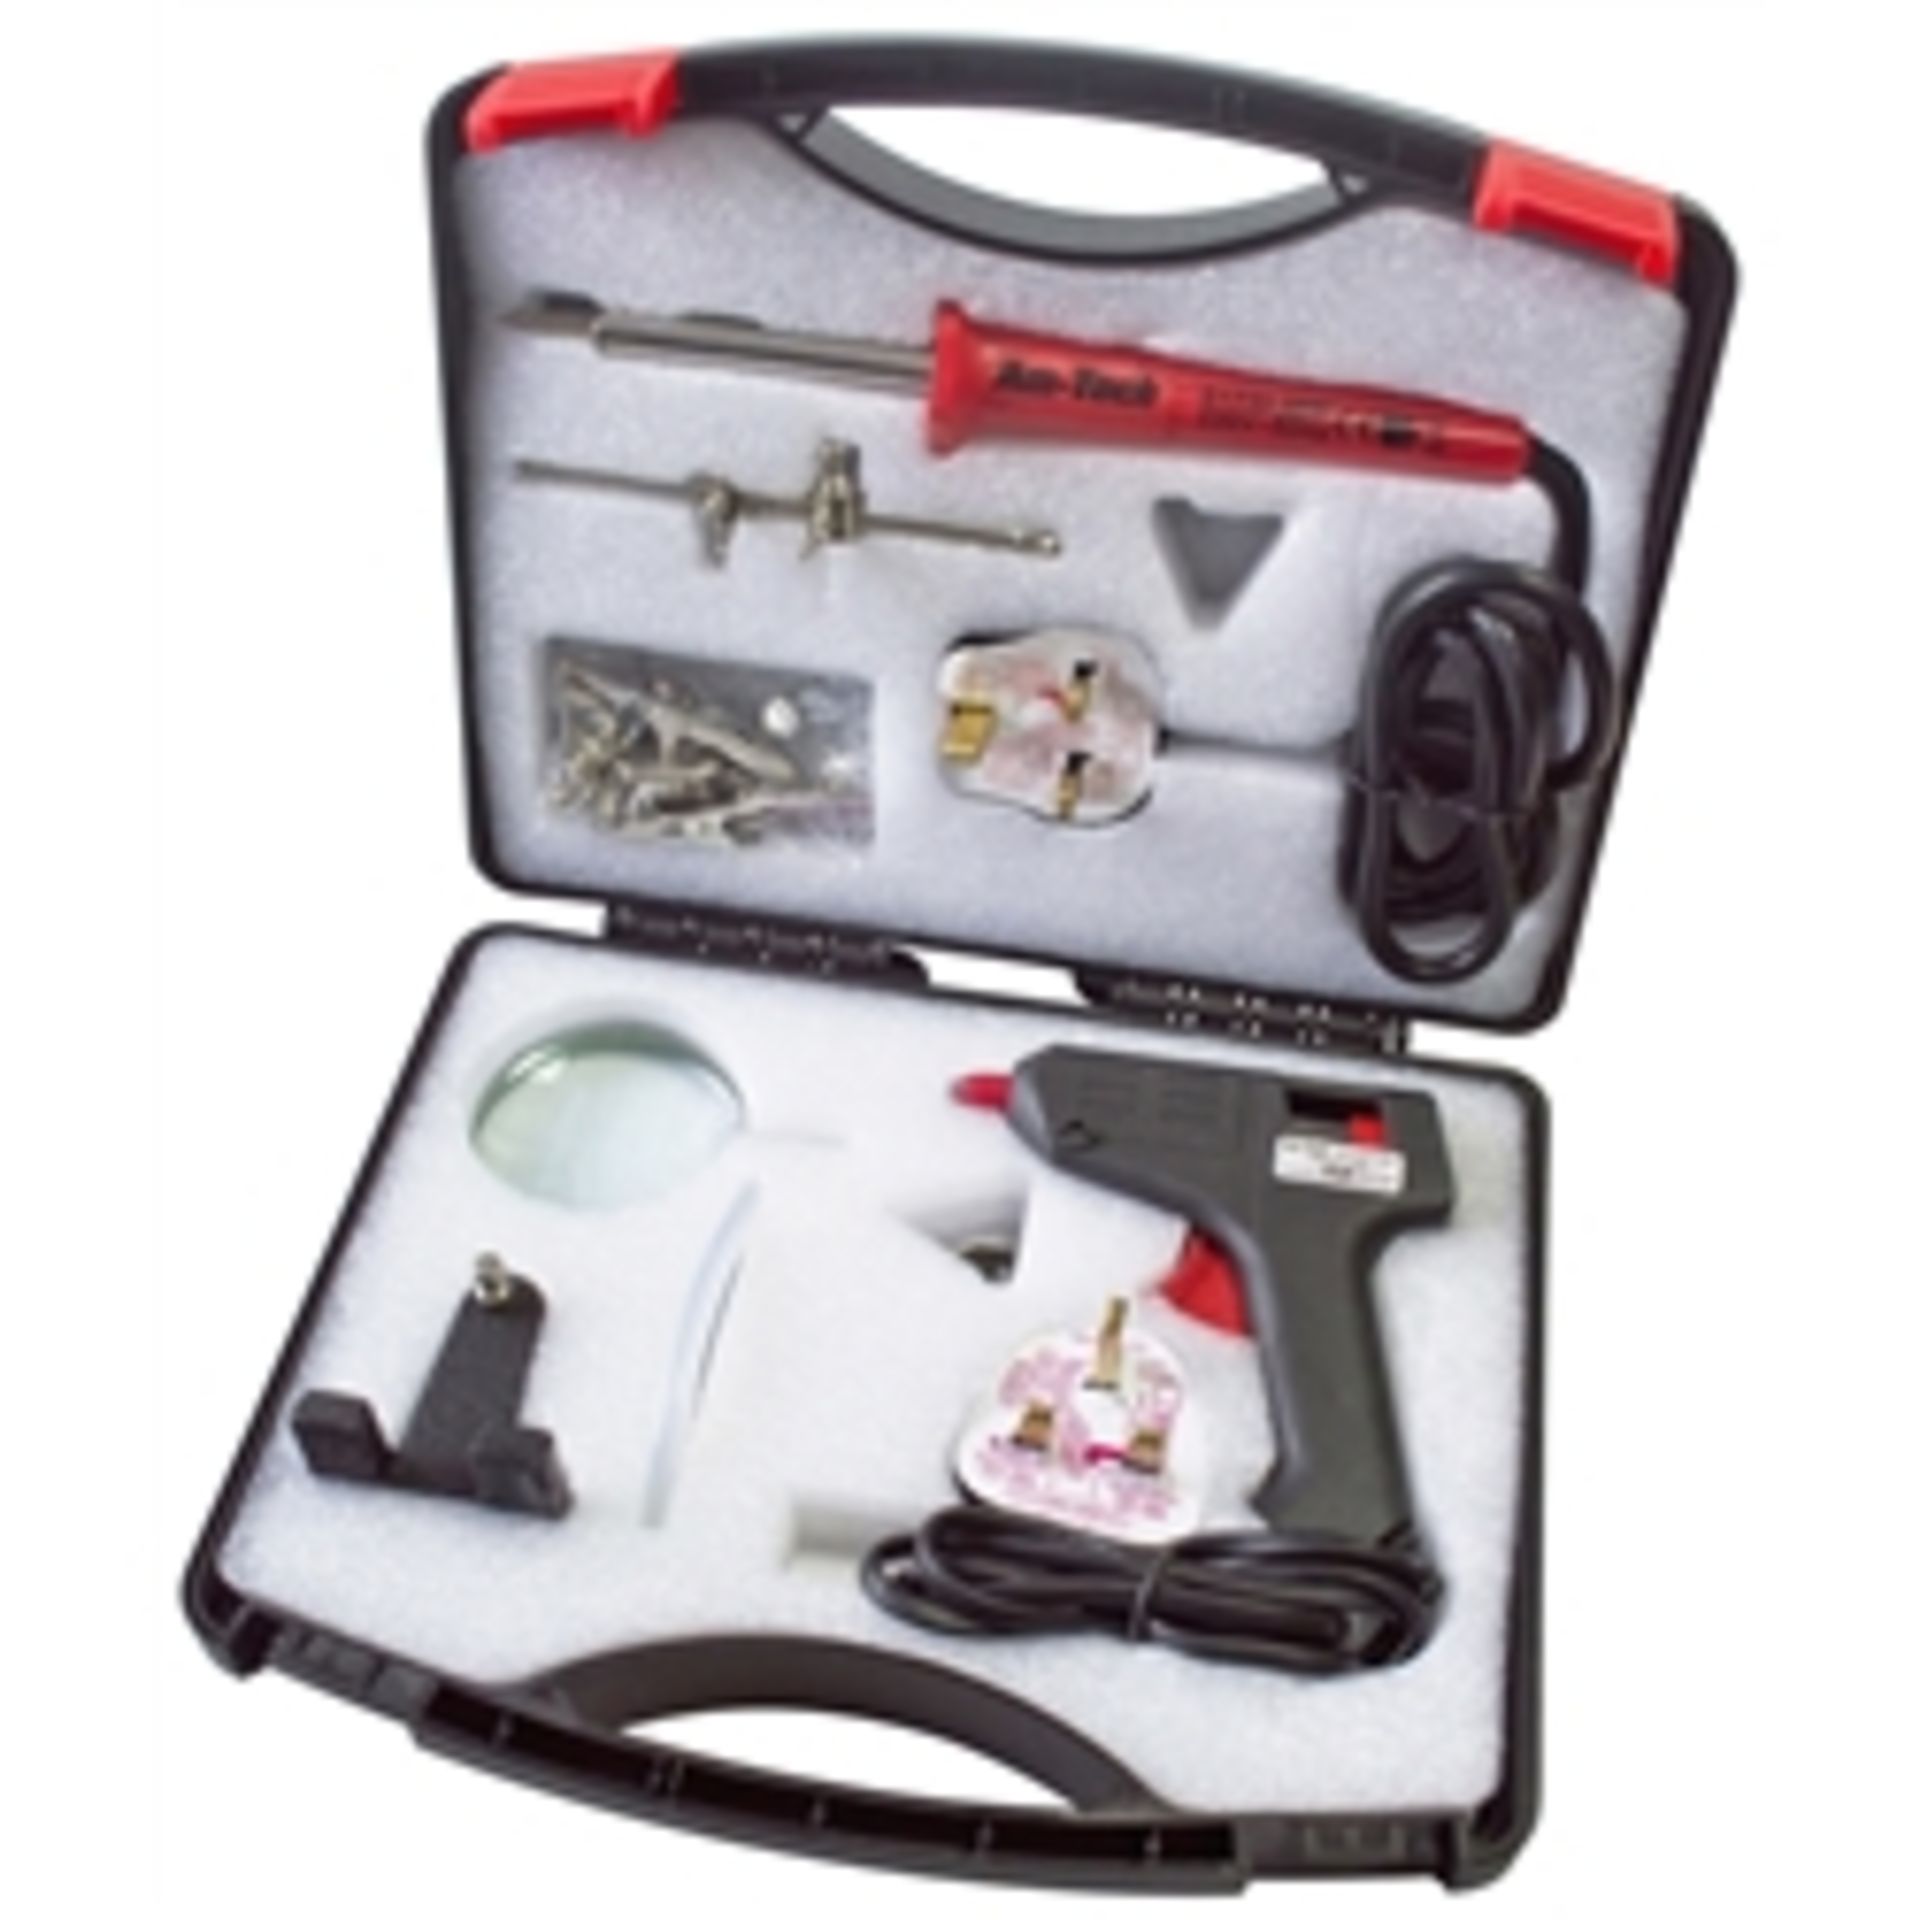 V *TRADE QTY* Brand New Soldering Gun With Accessories In Carry Case X 12 YOUR BID PRICE TO BE